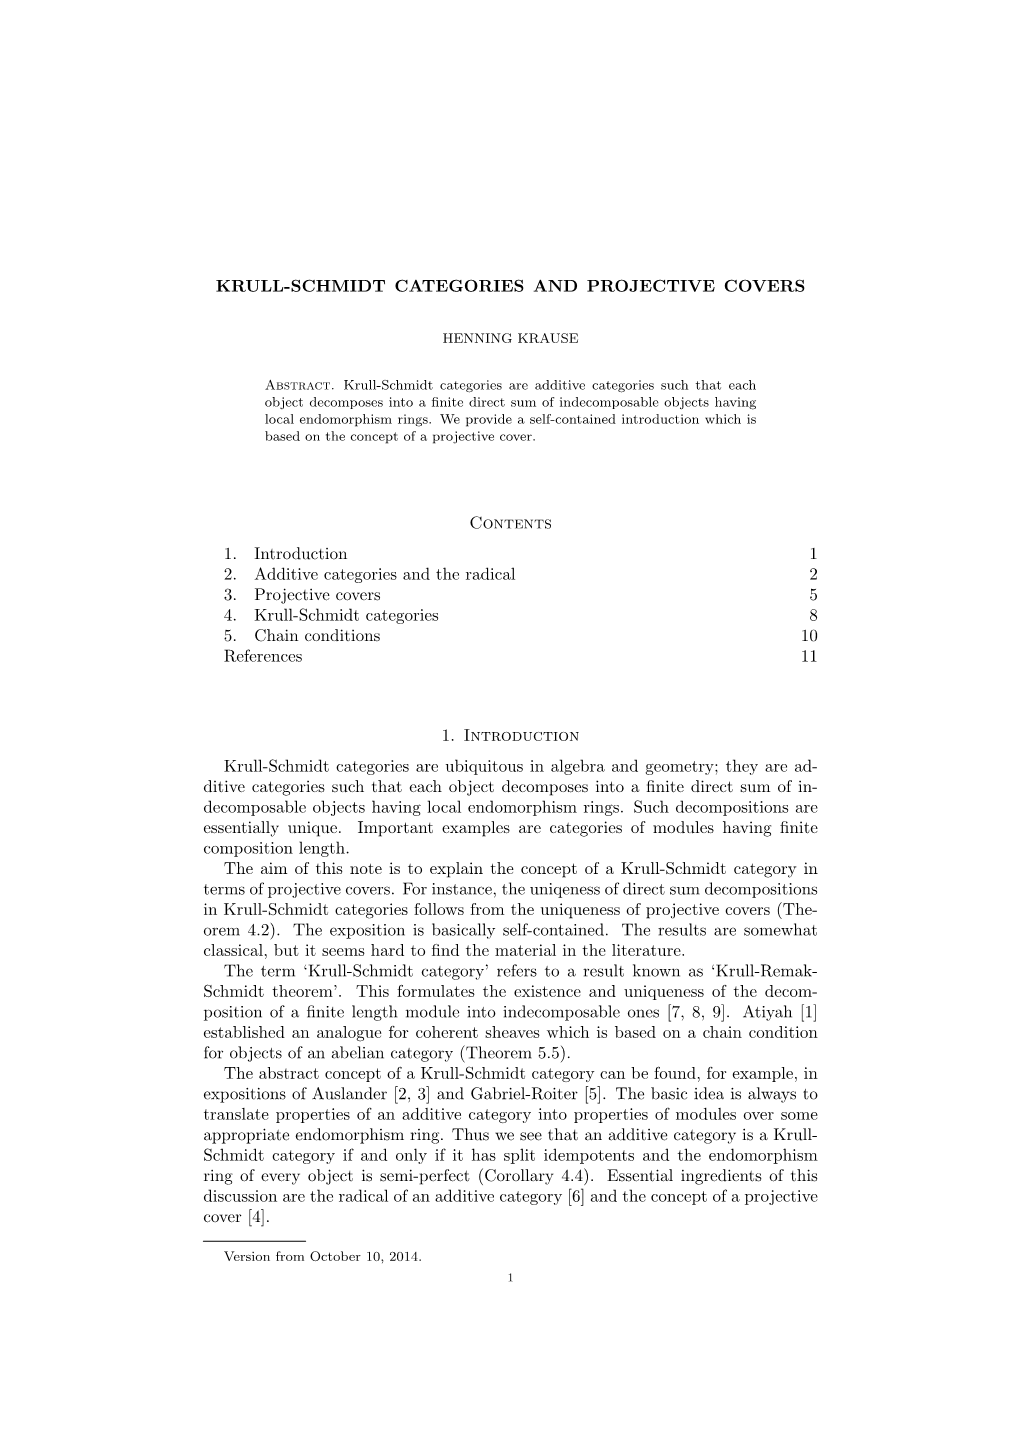 KRULL-SCHMIDT CATEGORIES and PROJECTIVE COVERS Contents